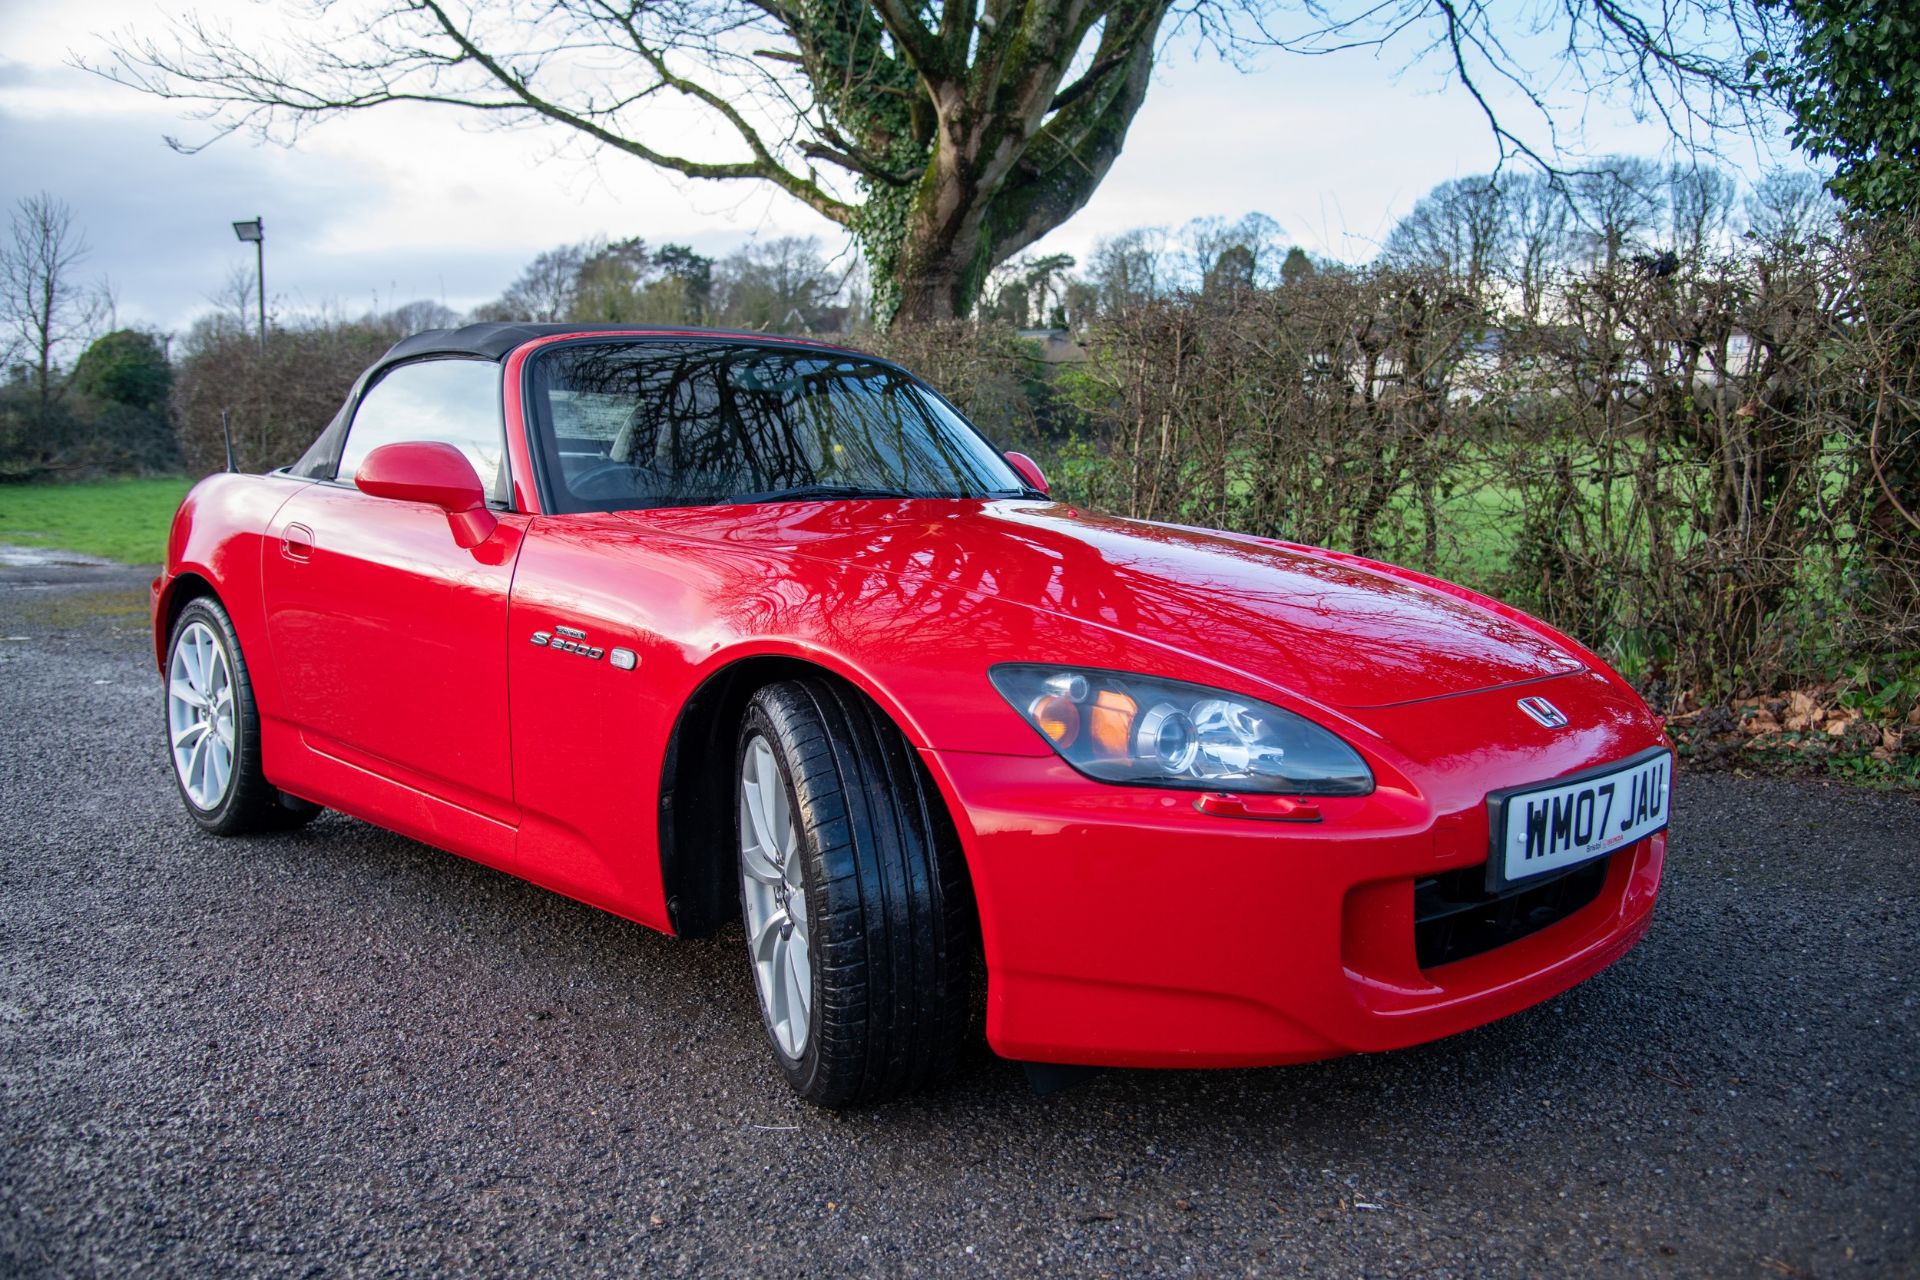 2007 HONDA S2000 Registration Number: WM07 JAU Chassis Number: JHMAP11207S200009 Recorded Mileage: - Image 3 of 26